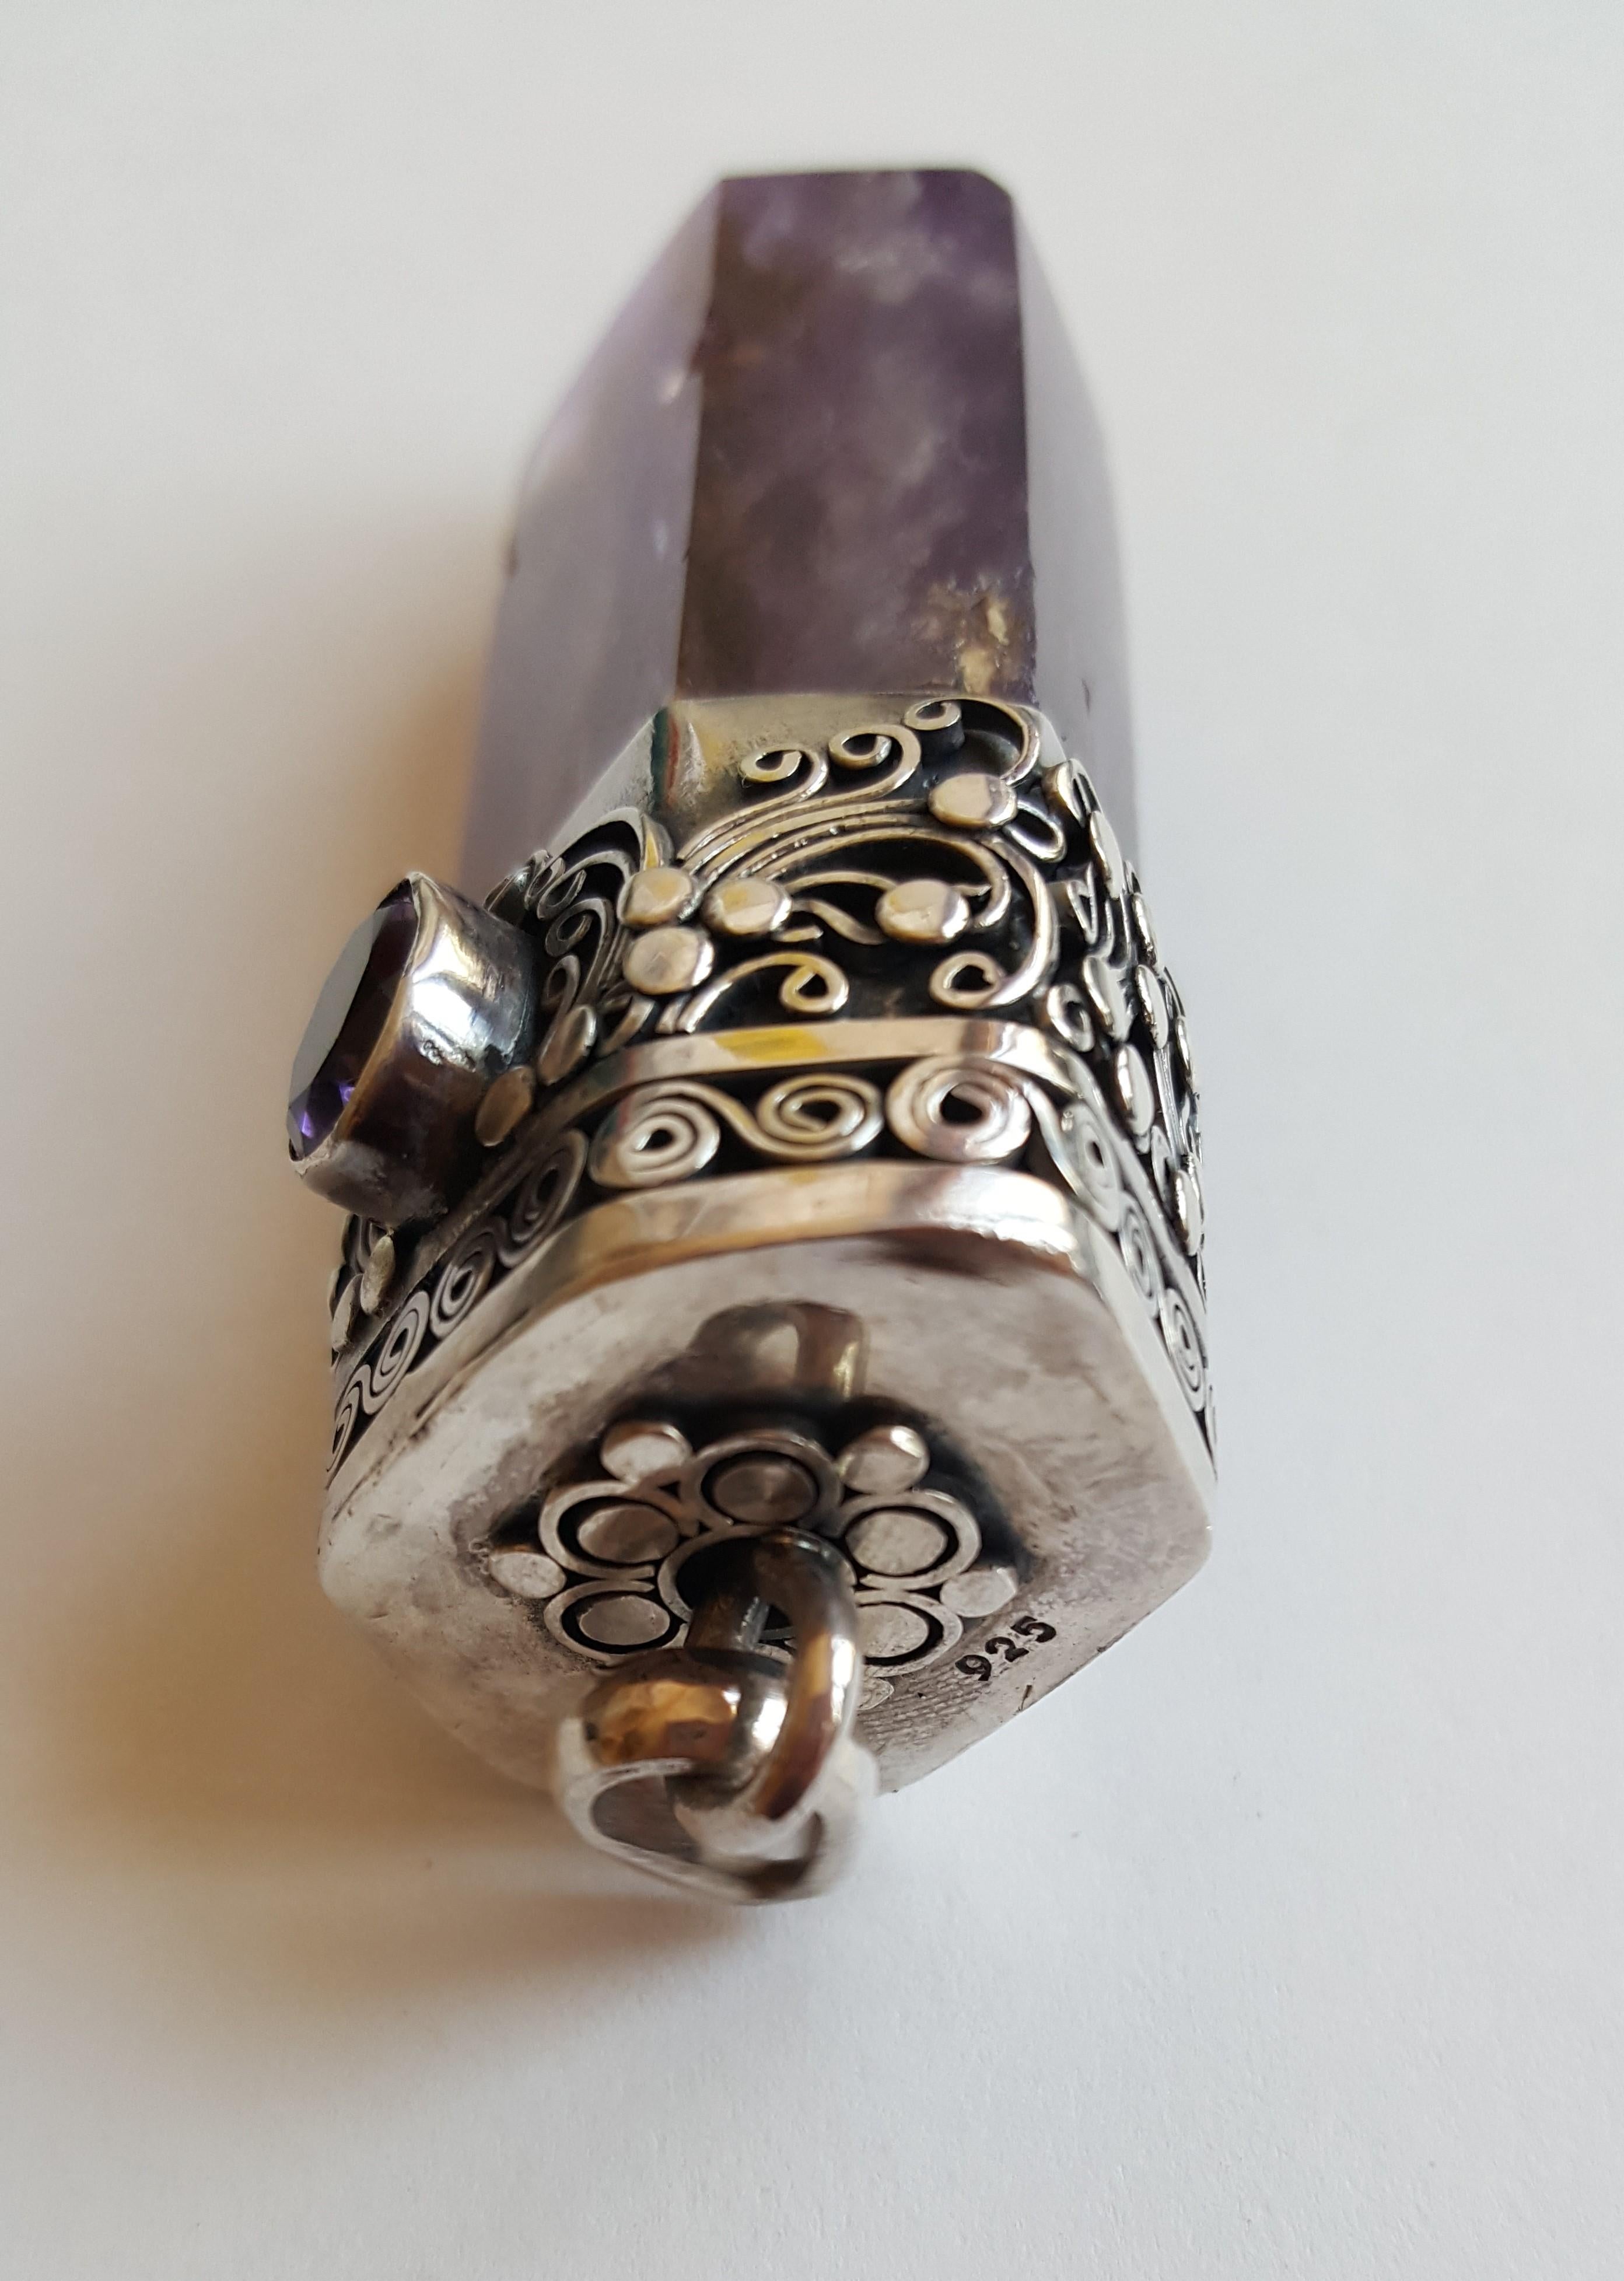 Ornate silver hand fabricated design and bail holding a rich purple polish amethyst stone. This piece is large and can be used at a pendant, The top bail has a beautifully fabricated design and it's stamped 925. Amethyst is believe to give off an